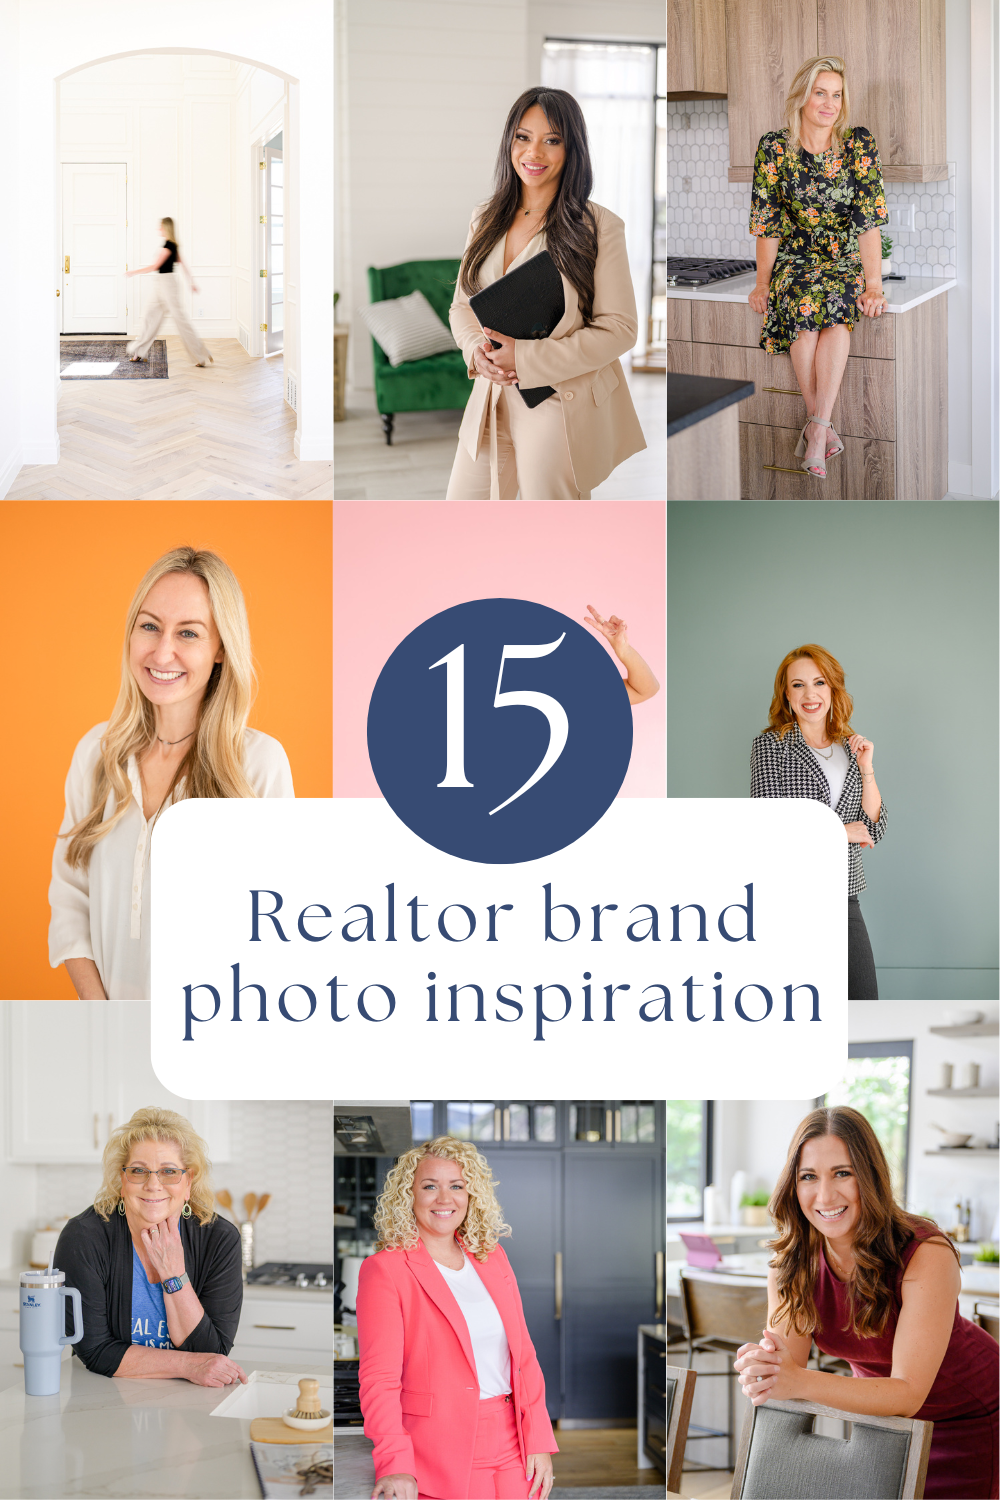 Realtor personal branding images taken by a brand photographer in utah